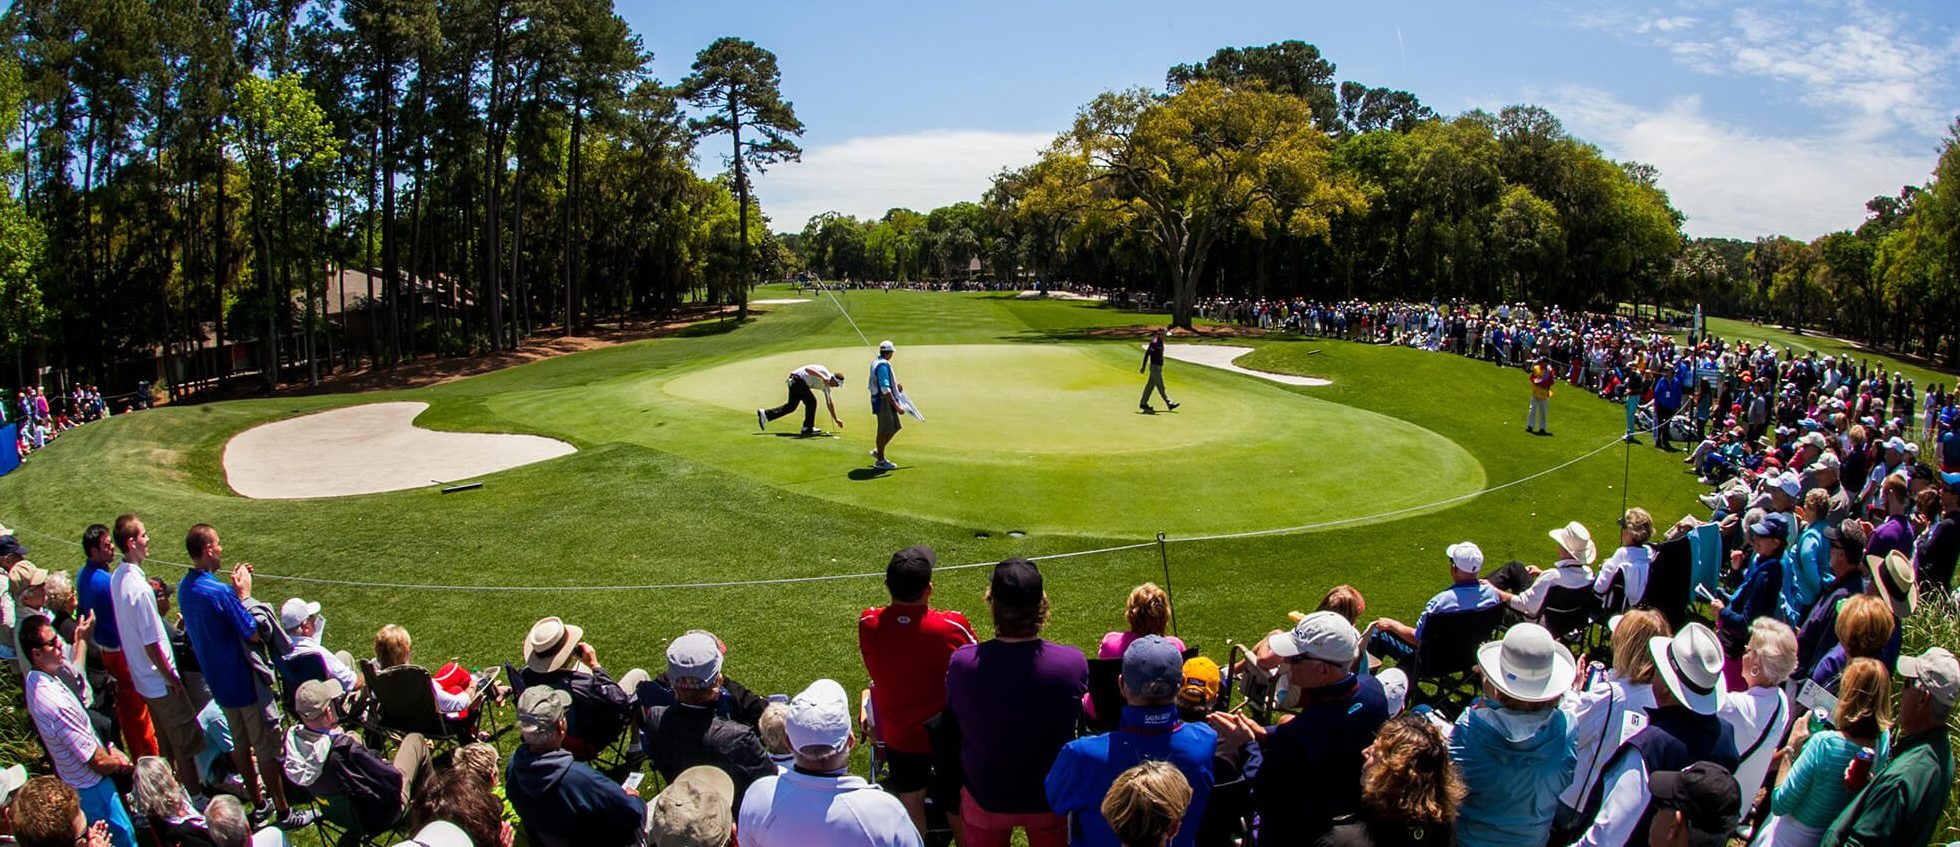 Dustin Johnson claims Augusta National can be likened to Harbour Town